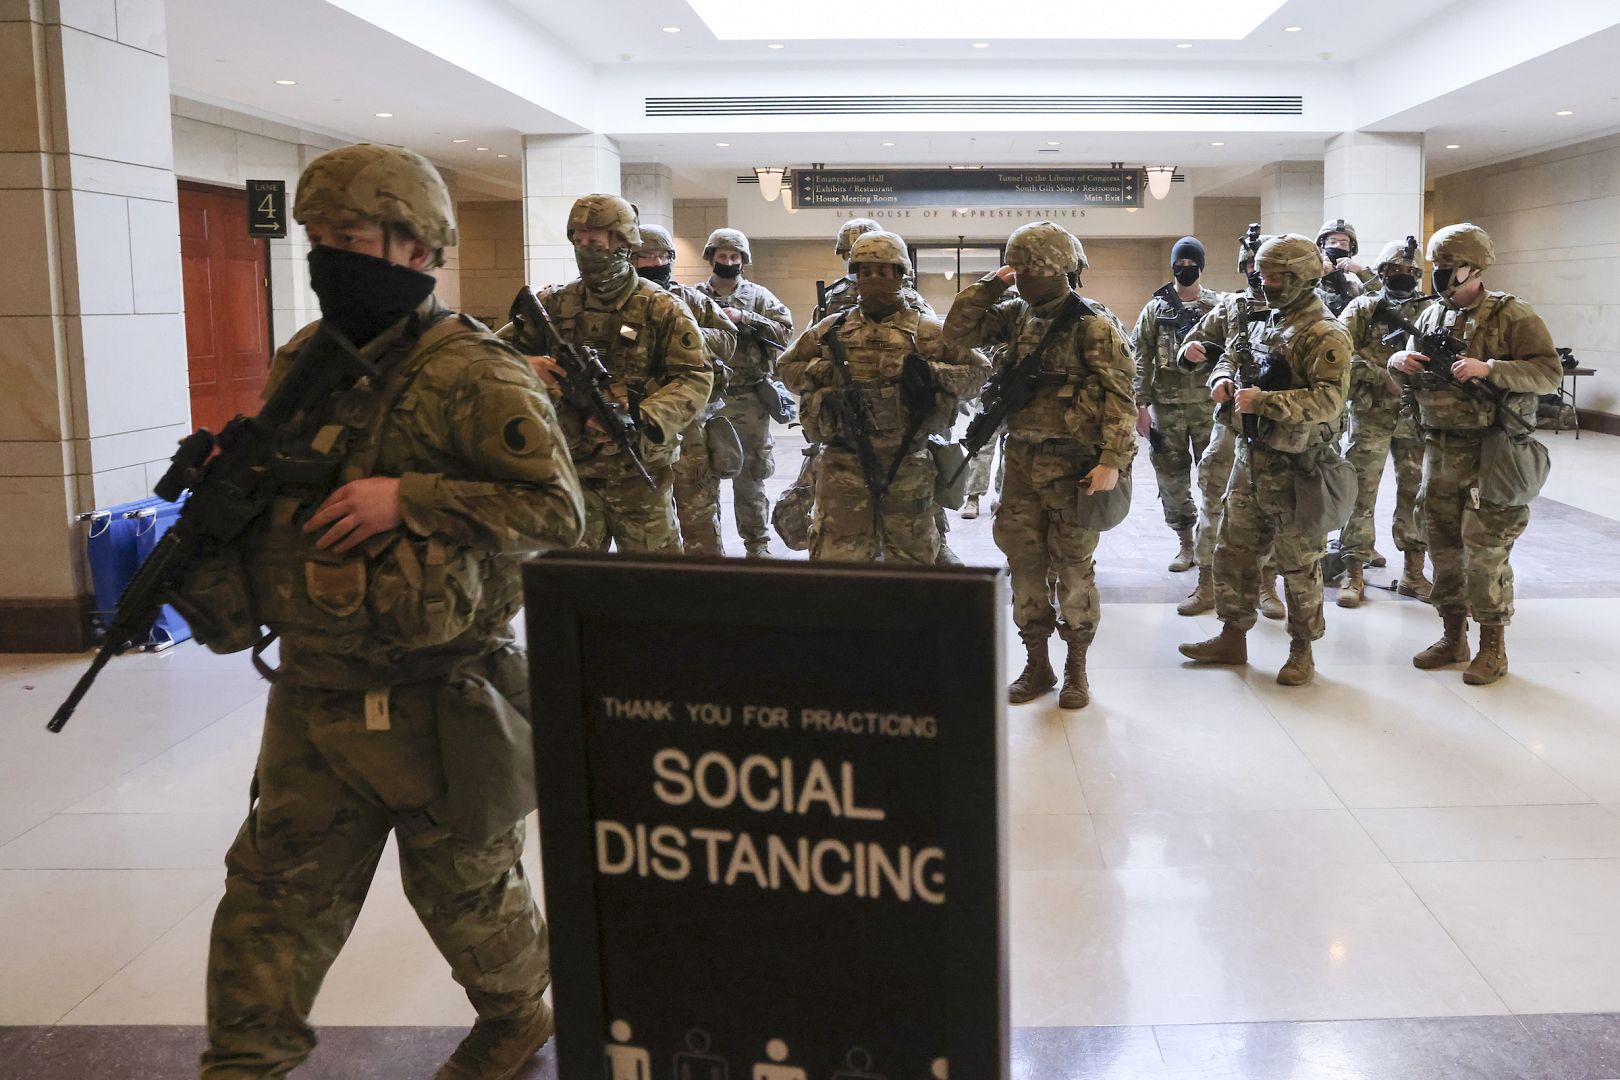 National Guard troops leave the U.S. Capitol Visitor Center after rehearsals for President-elect Joe Biden's inauguration, in Washington. January 18, 2021